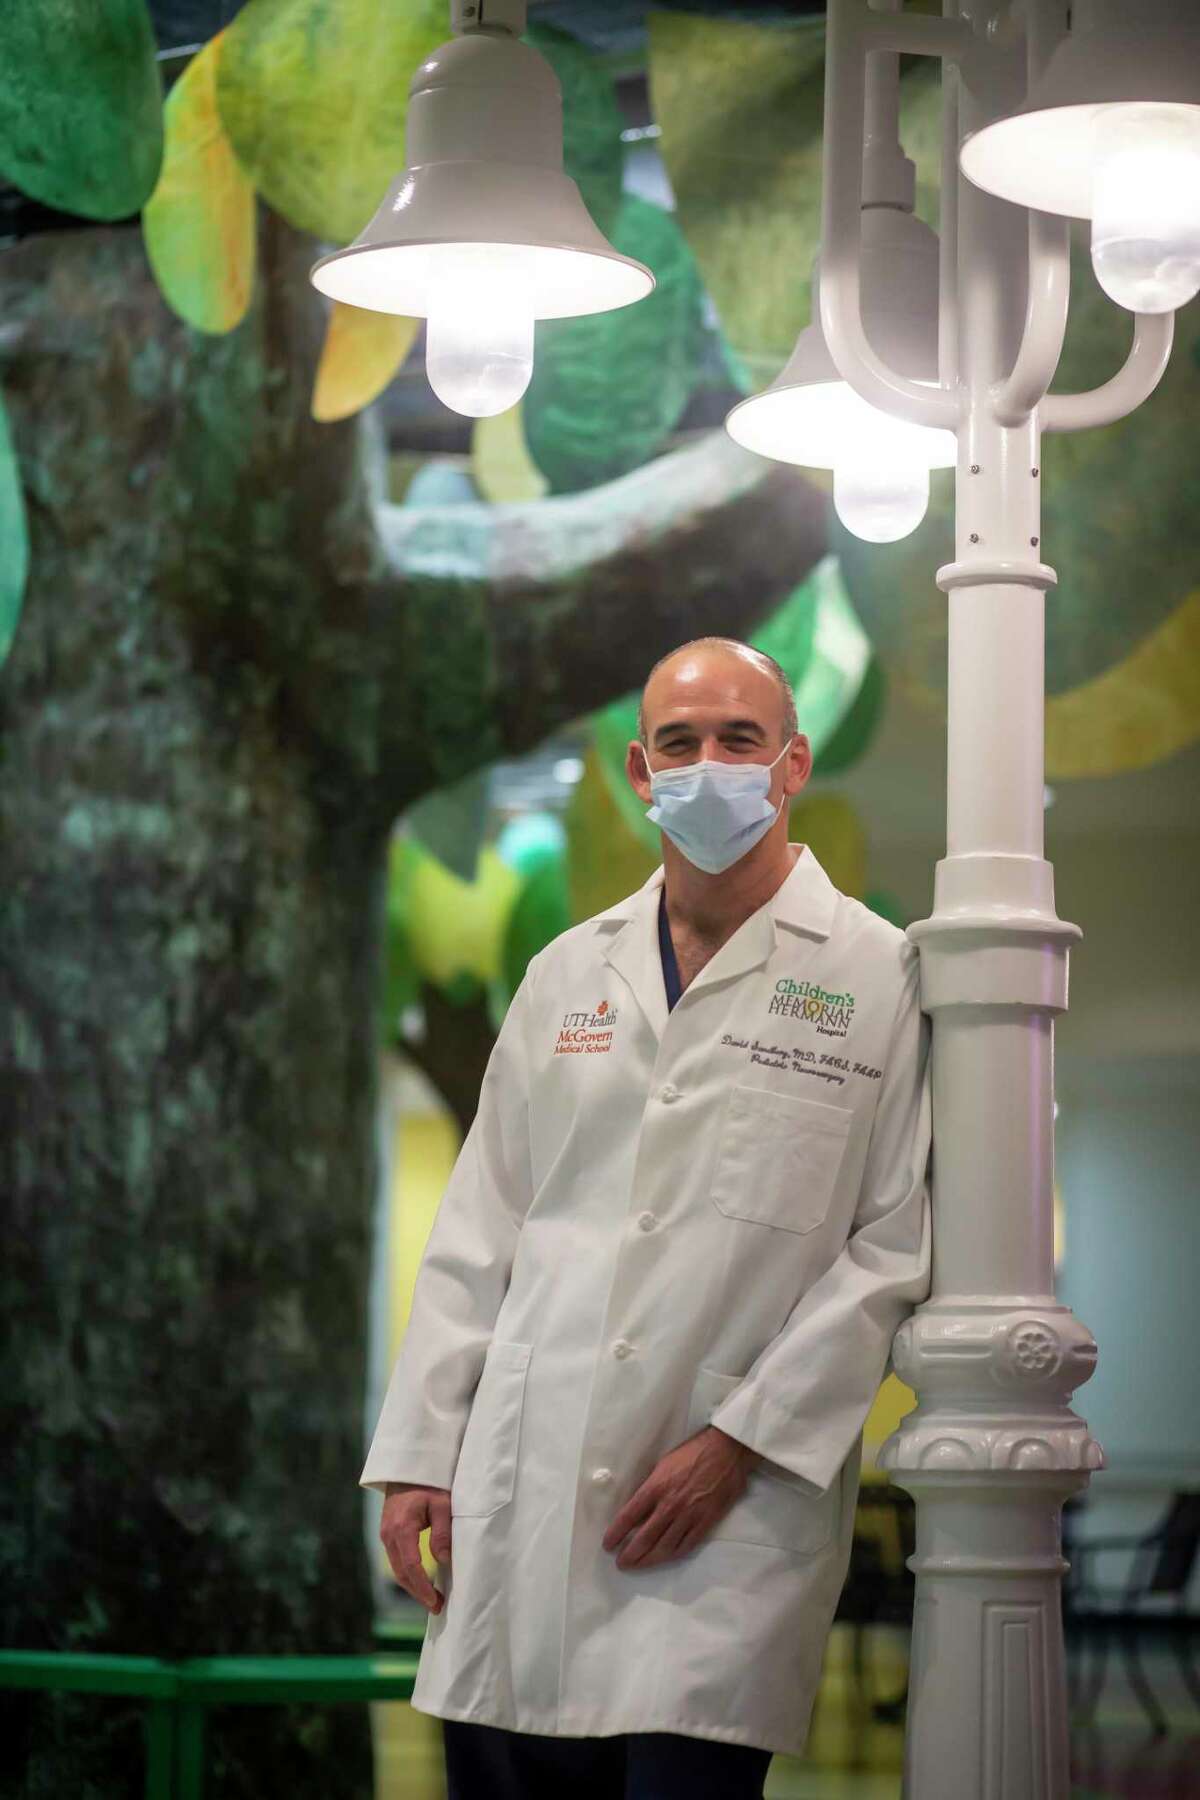 Dr. David Sandberg, professor and chief of pediatric neurosurgery at McGovern Medical School at UTHealth, and Director of Pediatric Neurosurgery at the Memorial Hermann Mischer Neuroscience Institute, poses for a portrait at Memorial Hermann on the Texas Medical Center campus in Houston on Thursday, Aug. 12, 2021. Dr. Sandberg performed a live-saving surgery on five year old Jakota Kellis earlier this year to remove a ruptured cyst.